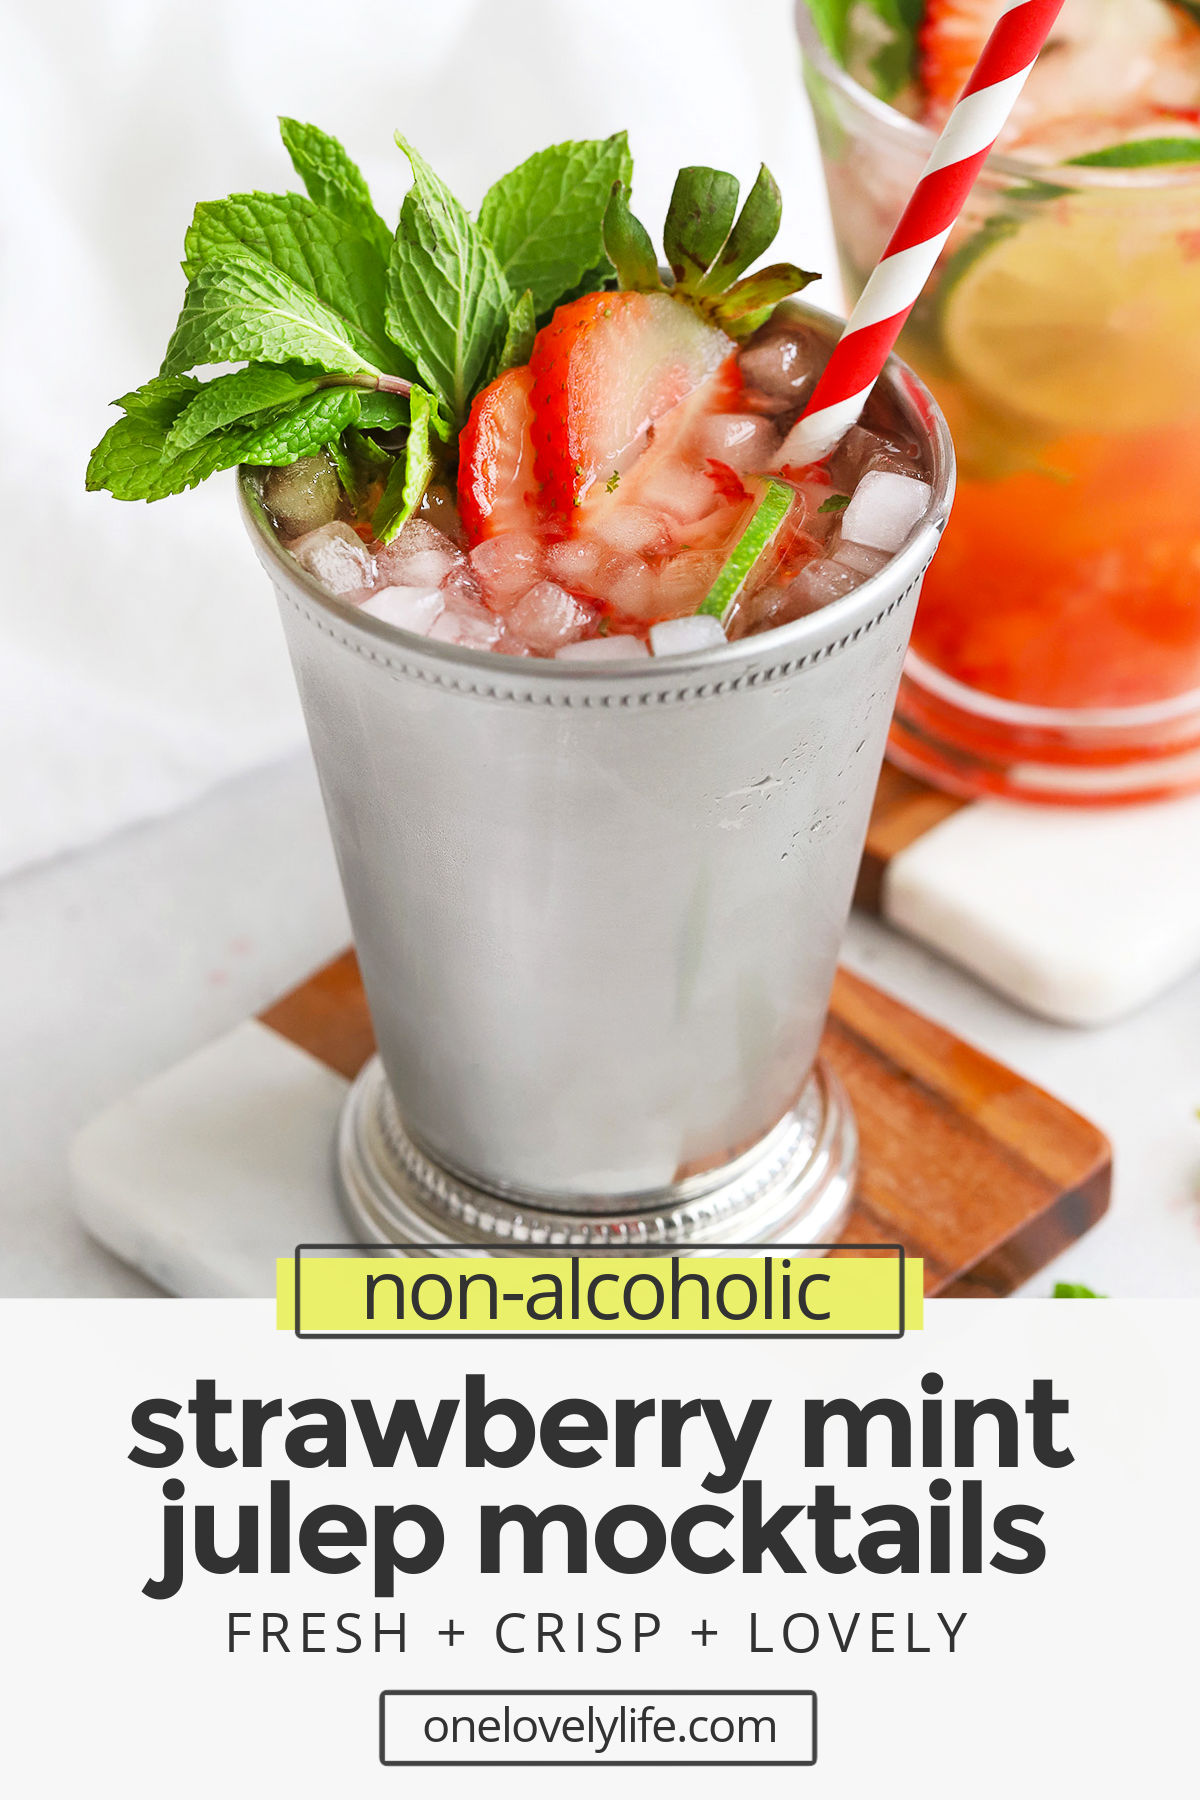 These Virgin Strawberry Mint Juleps are great for a Kentucky Derby party with kids or make the perfect drink for a casual summer barbecue. Mint Julep Mocktails // Strawberry Mint Julep // Disneyland Mint Julep // Disney Mint Julep // Non-alcholic Mint Julep #julep #mintjulep #mocktail #nonalcoholic